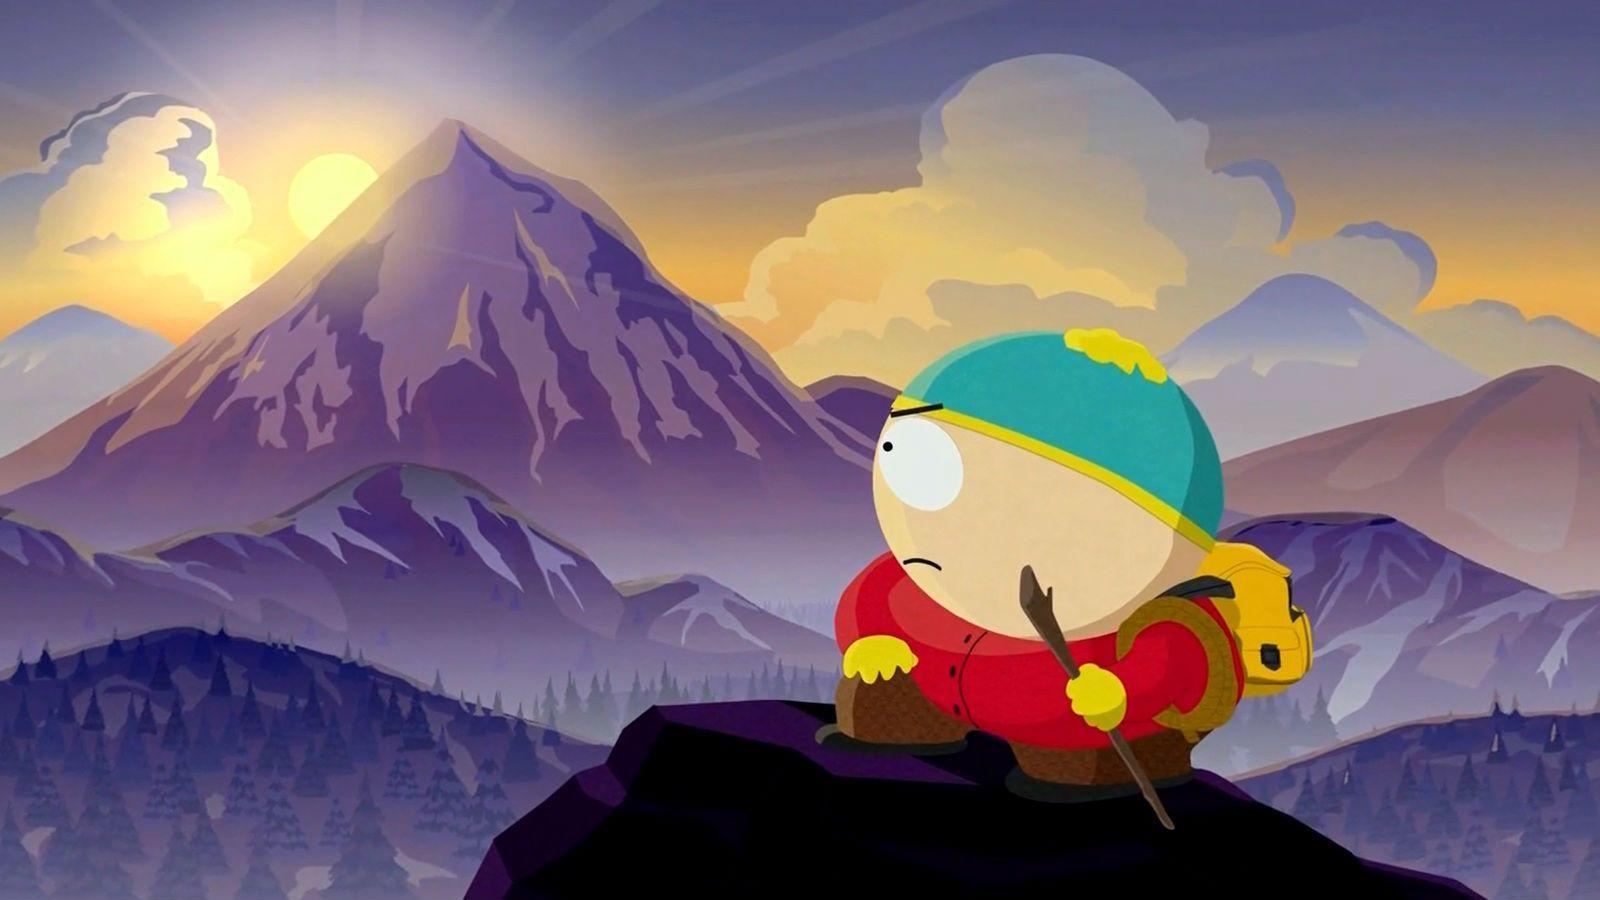 Southpark Wallpapers 20570 1920x1200 px